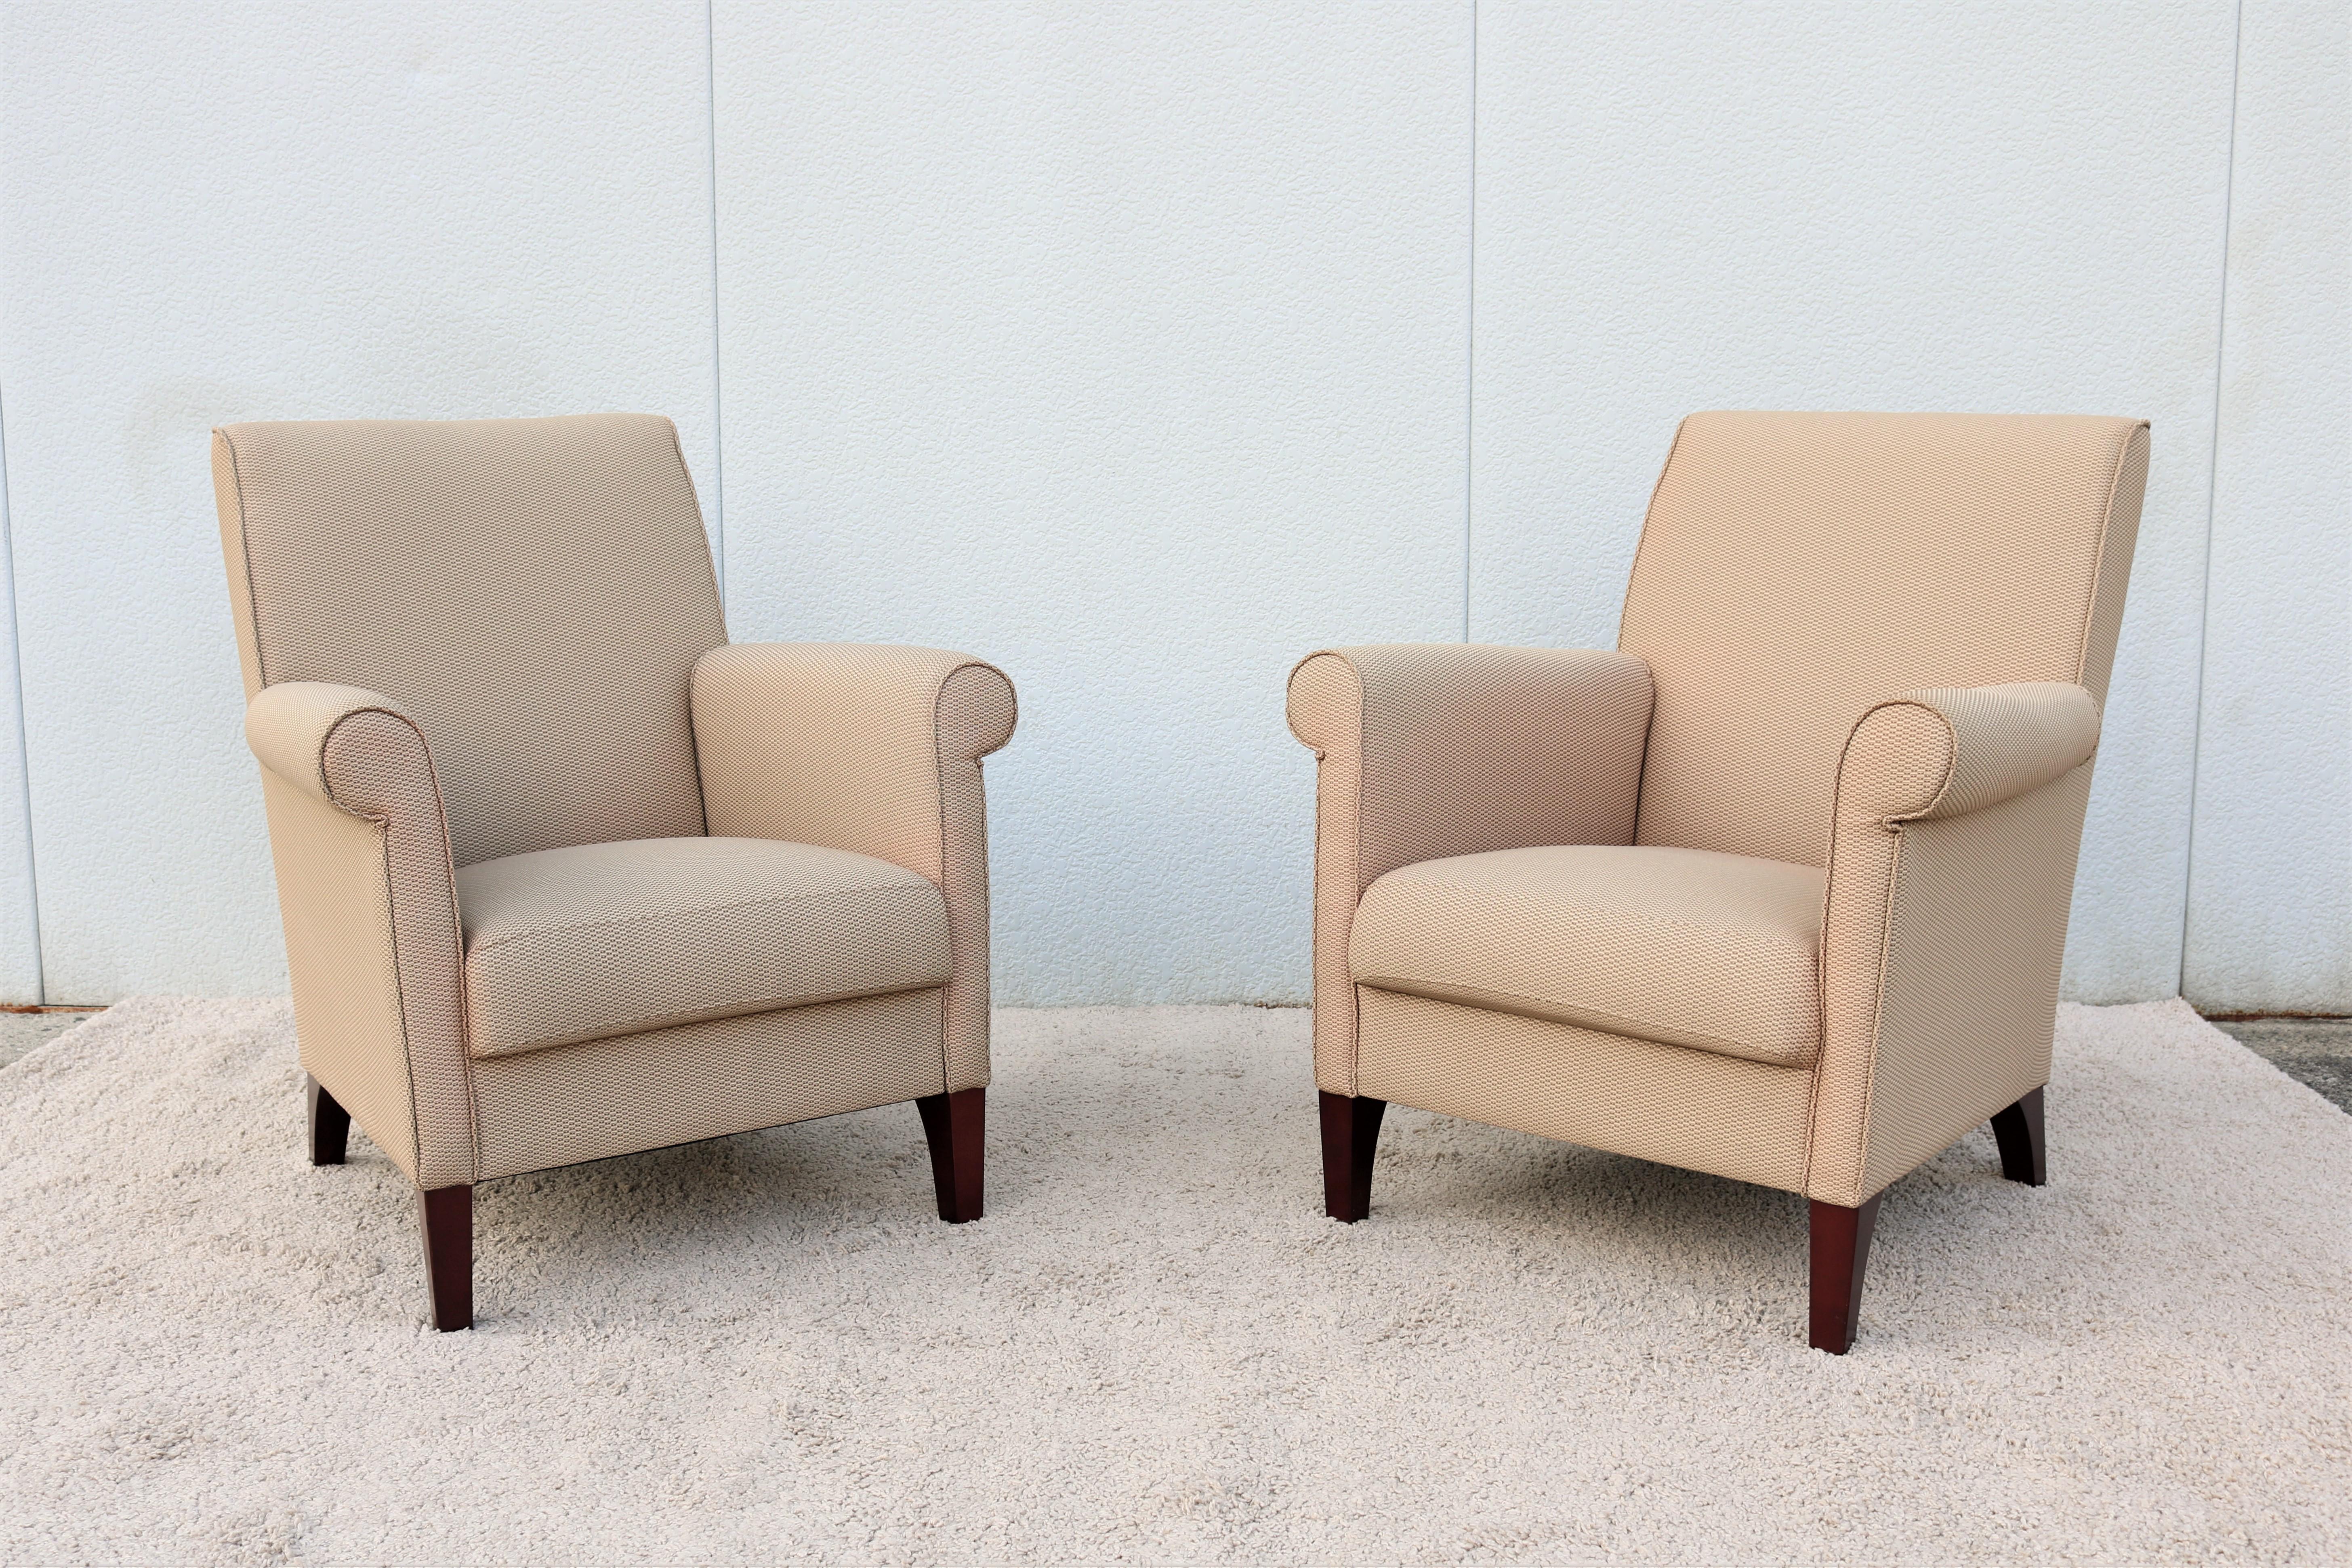 Modern Contemporary Edgar Reuter for Coalesse Khaki Pasio Lounge Chairs, a Pair In Excellent Condition For Sale In Secaucus, NJ